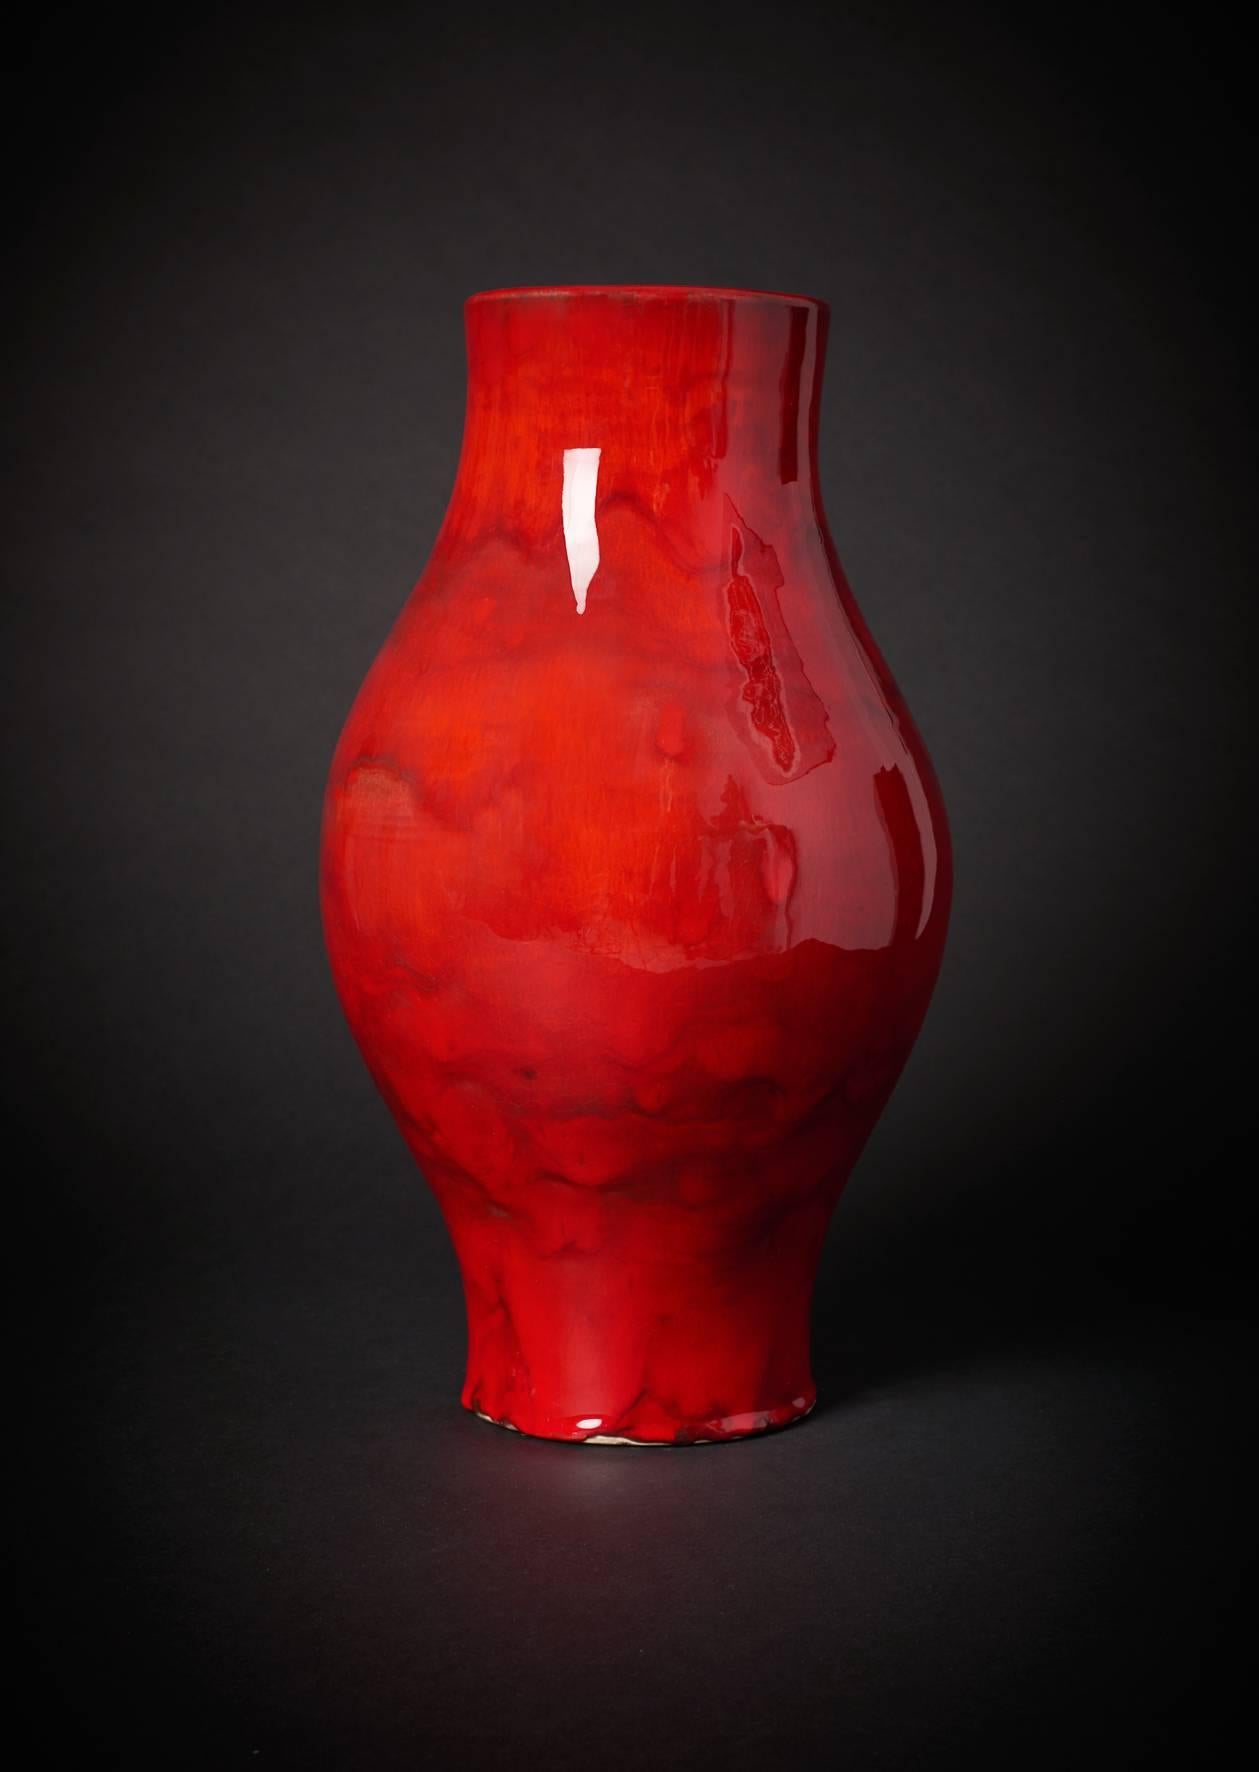 Large vase by Robert and Jean Cloutier (1930-2015) with famous 